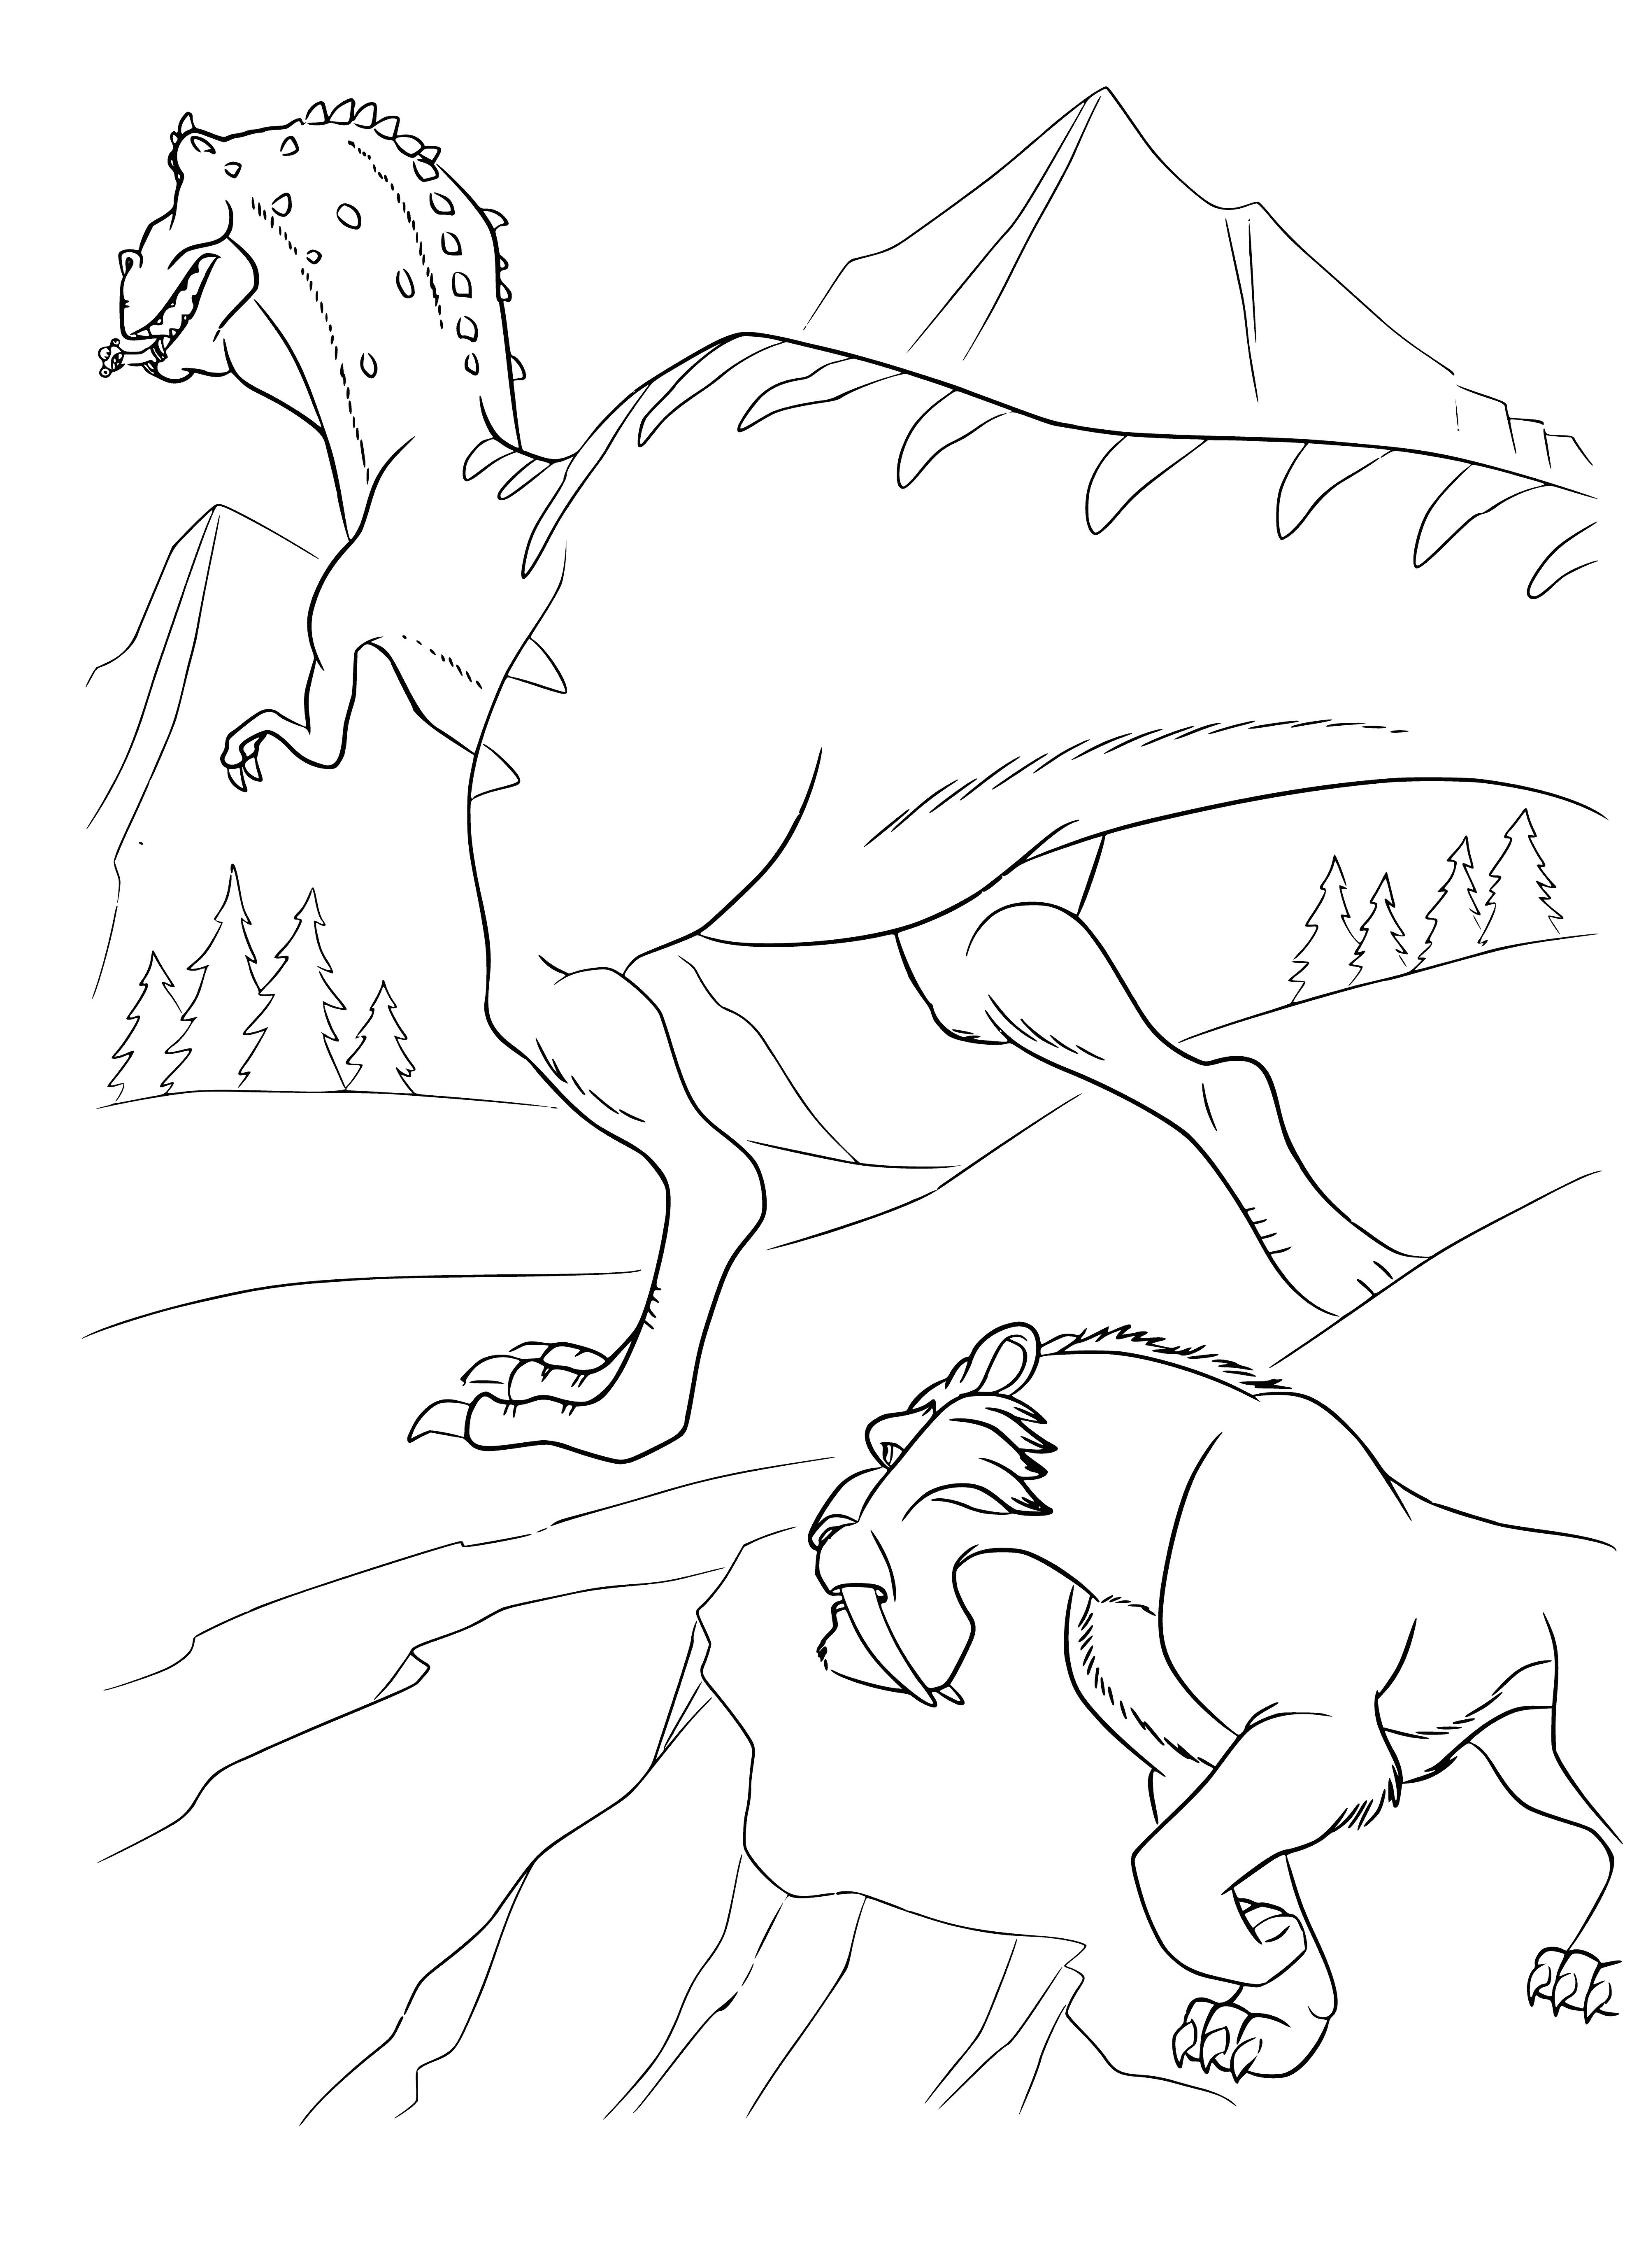 coloring page: A blue sky w/ white clouds, bright sun & a white/brown tiger in a green field, standing on hind legs w/ front paws in the air & tongue hanging out.